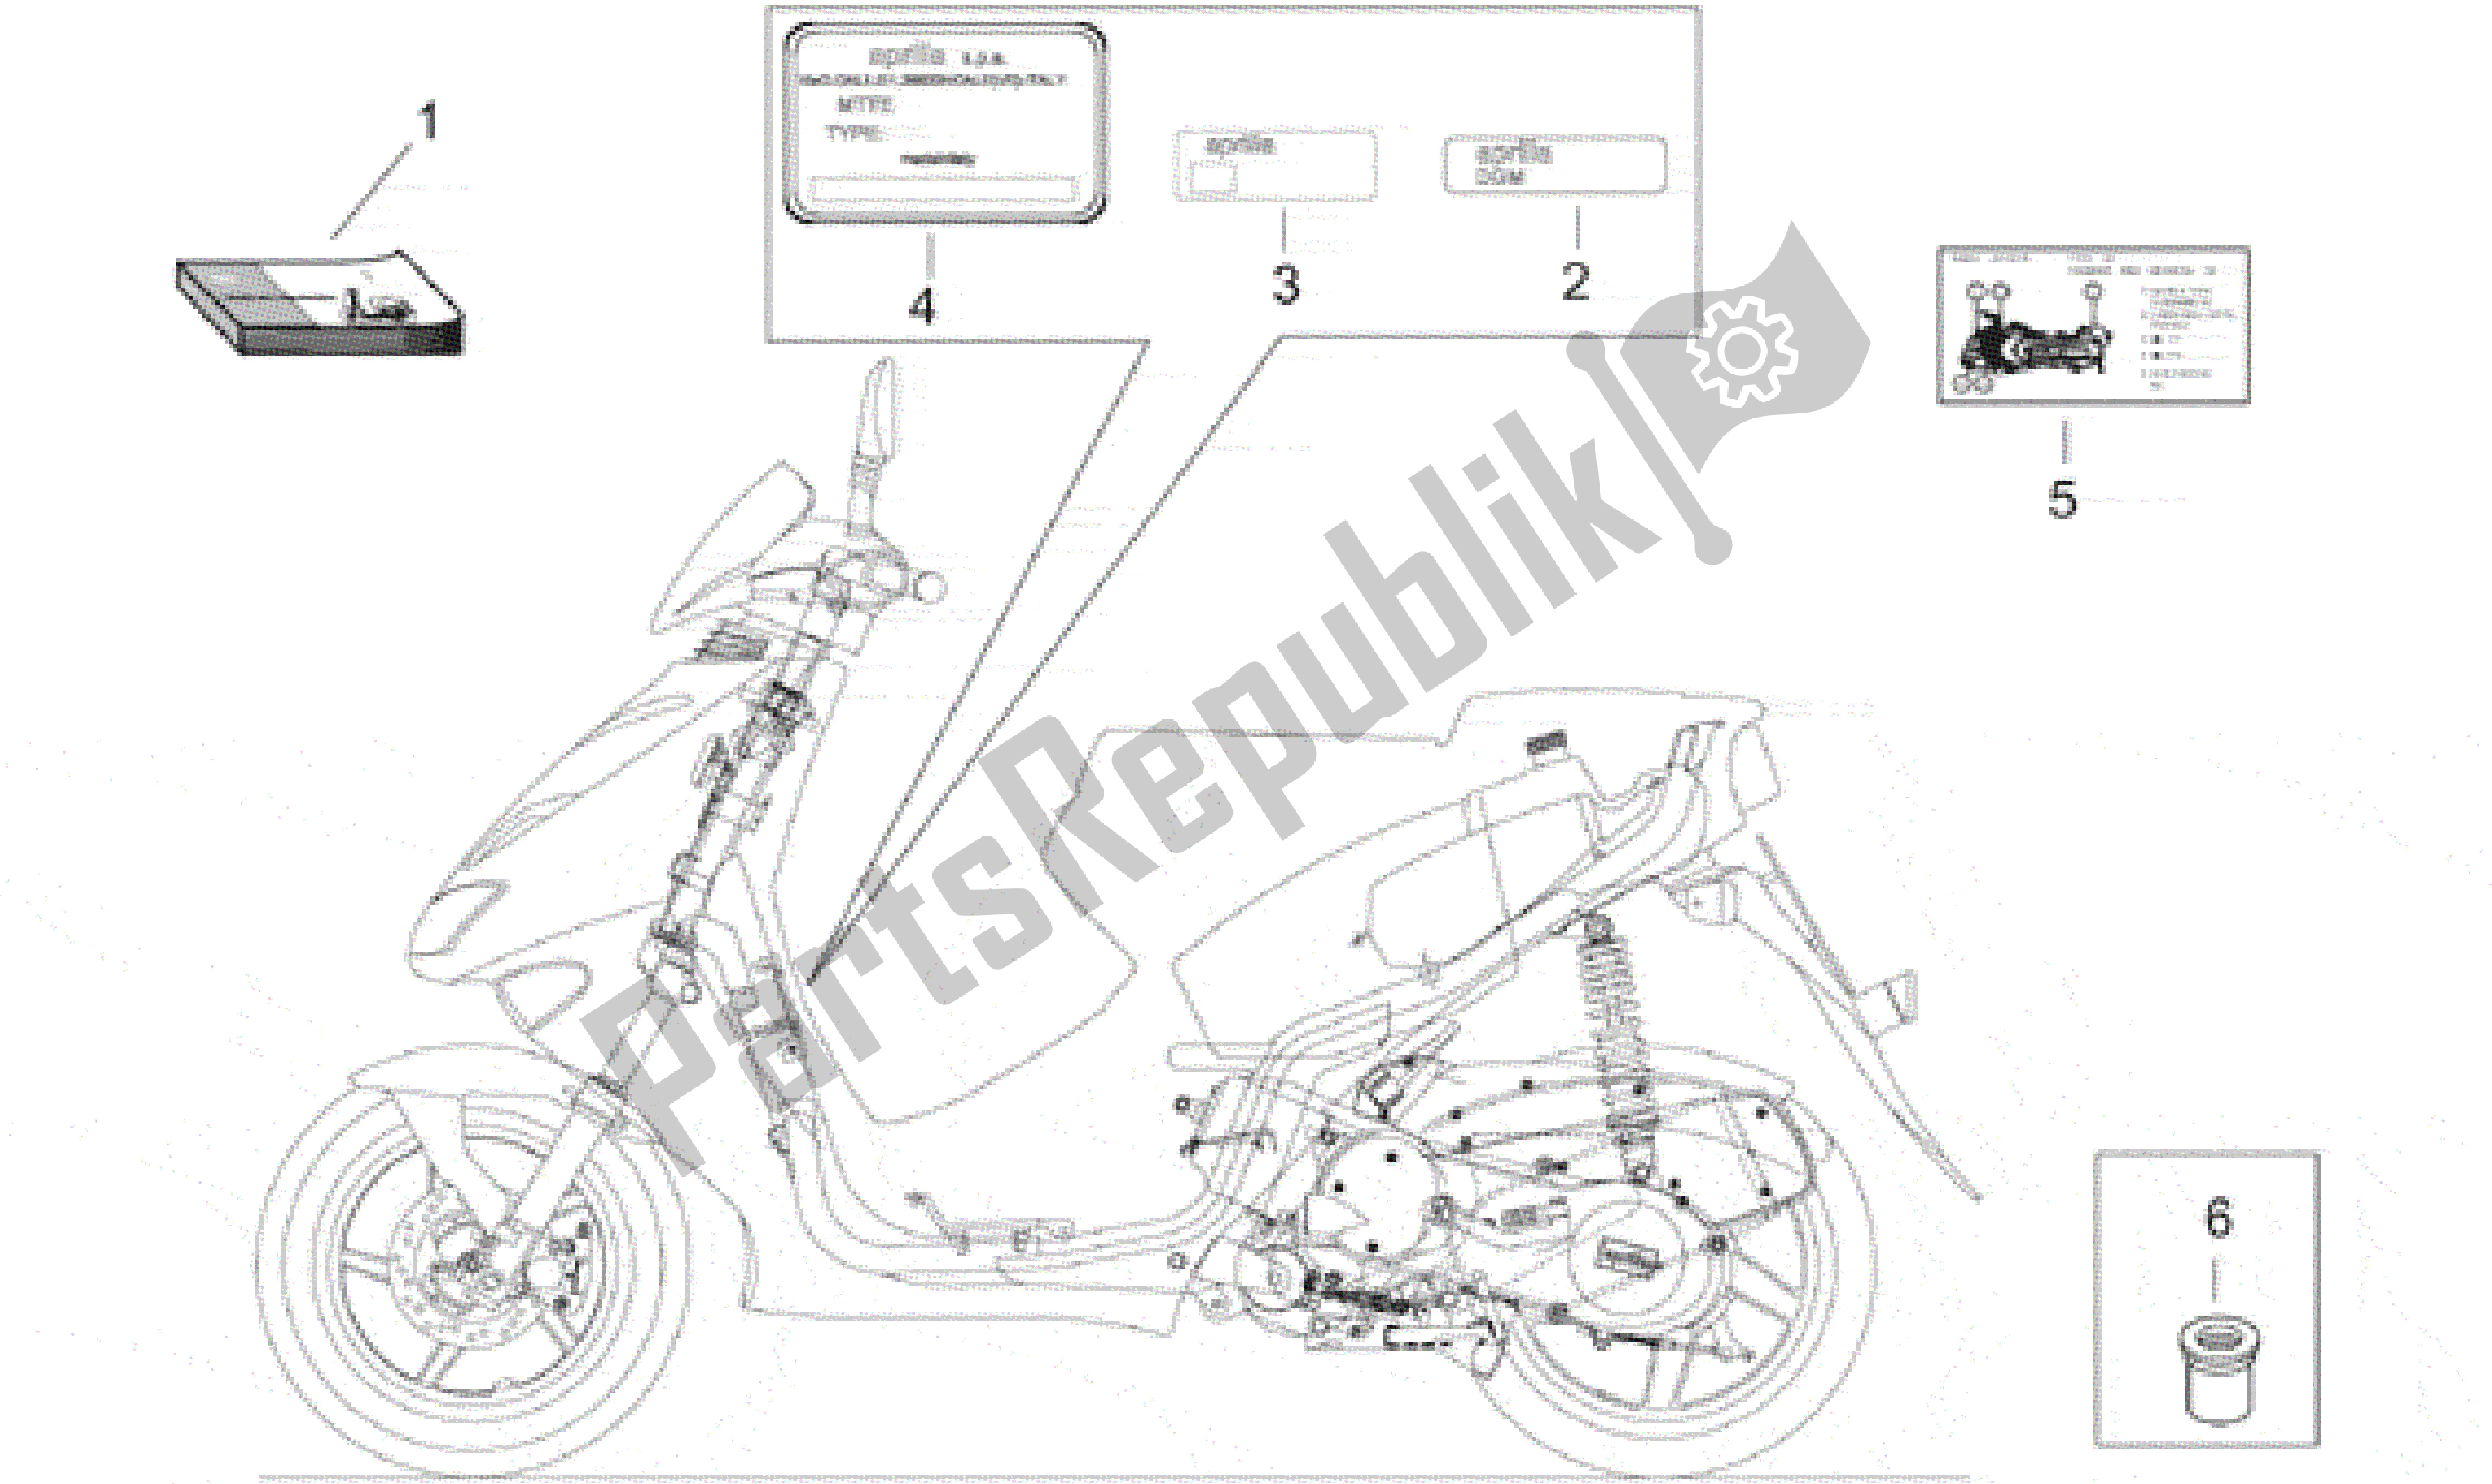 All parts for the Plate Set And Handbooks of the Aprilia SR 125 1999 - 2001